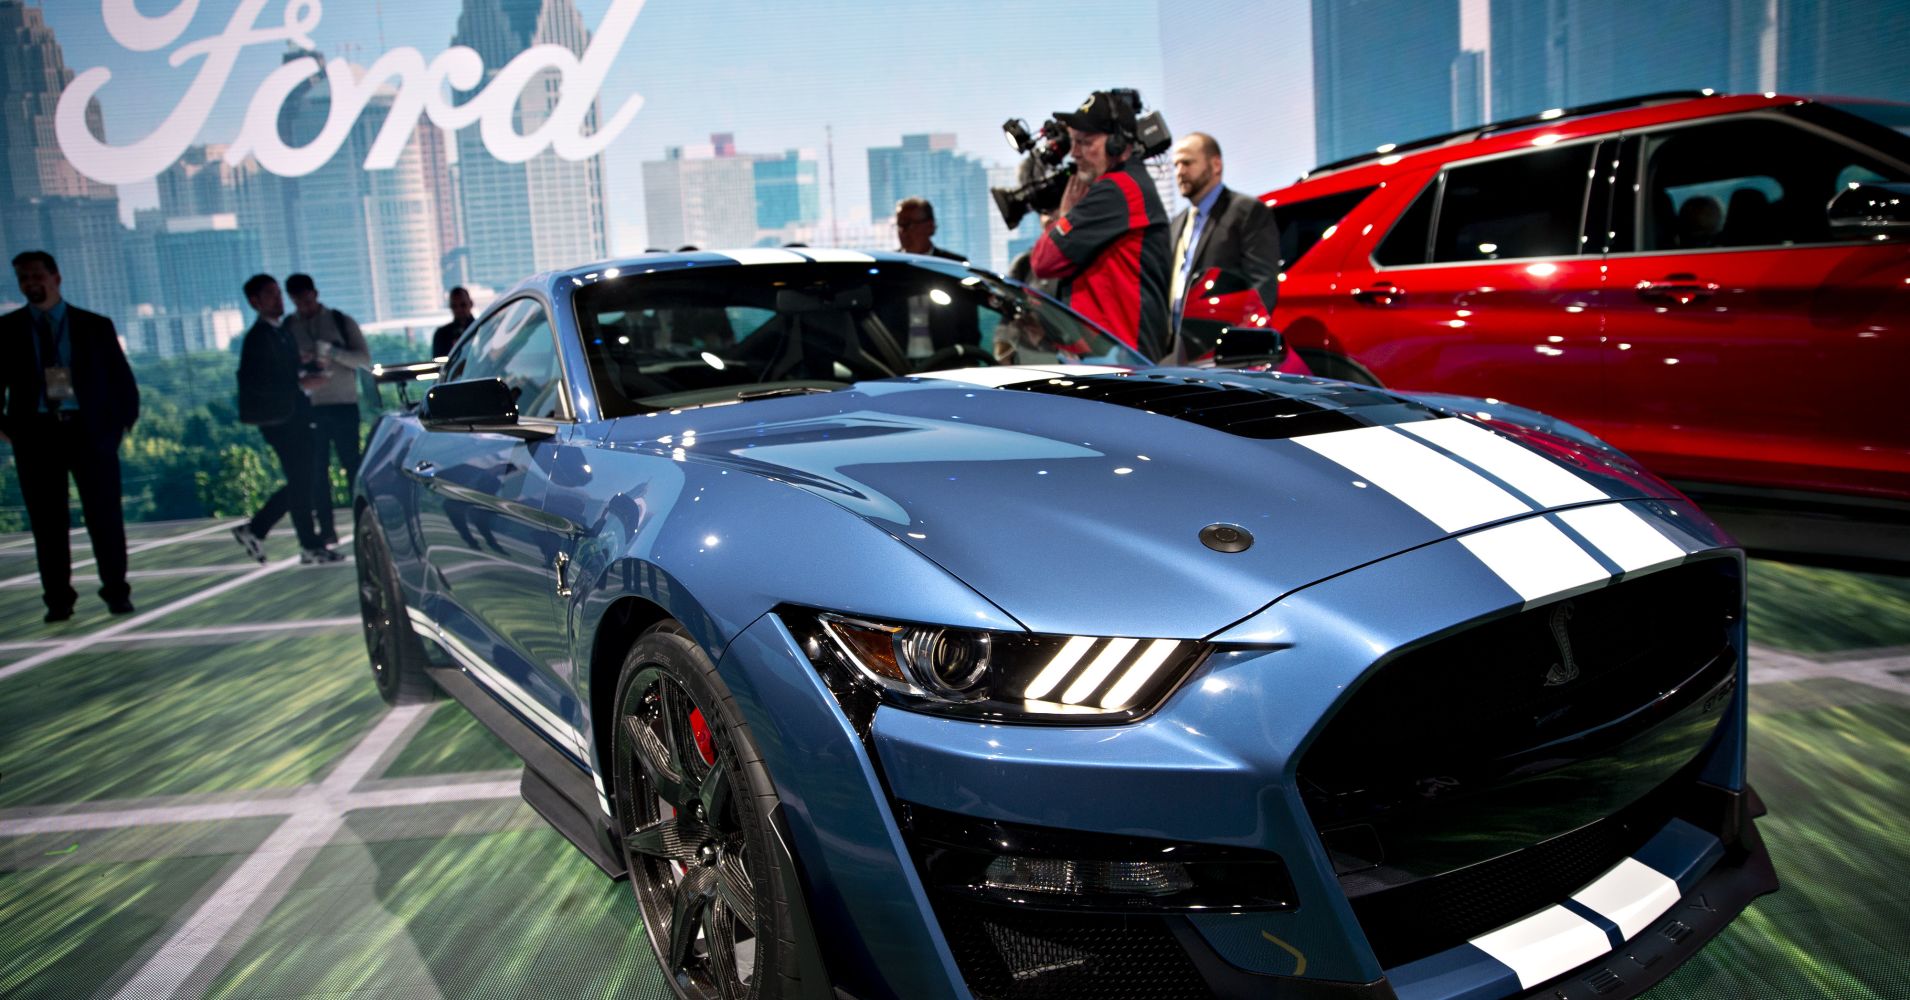 The Ford Motor Co. Mustang Shelby GT500 vehicle is displayed during the 2019 North American International Auto Show (NAIAS) in Detroit, Michigan,.